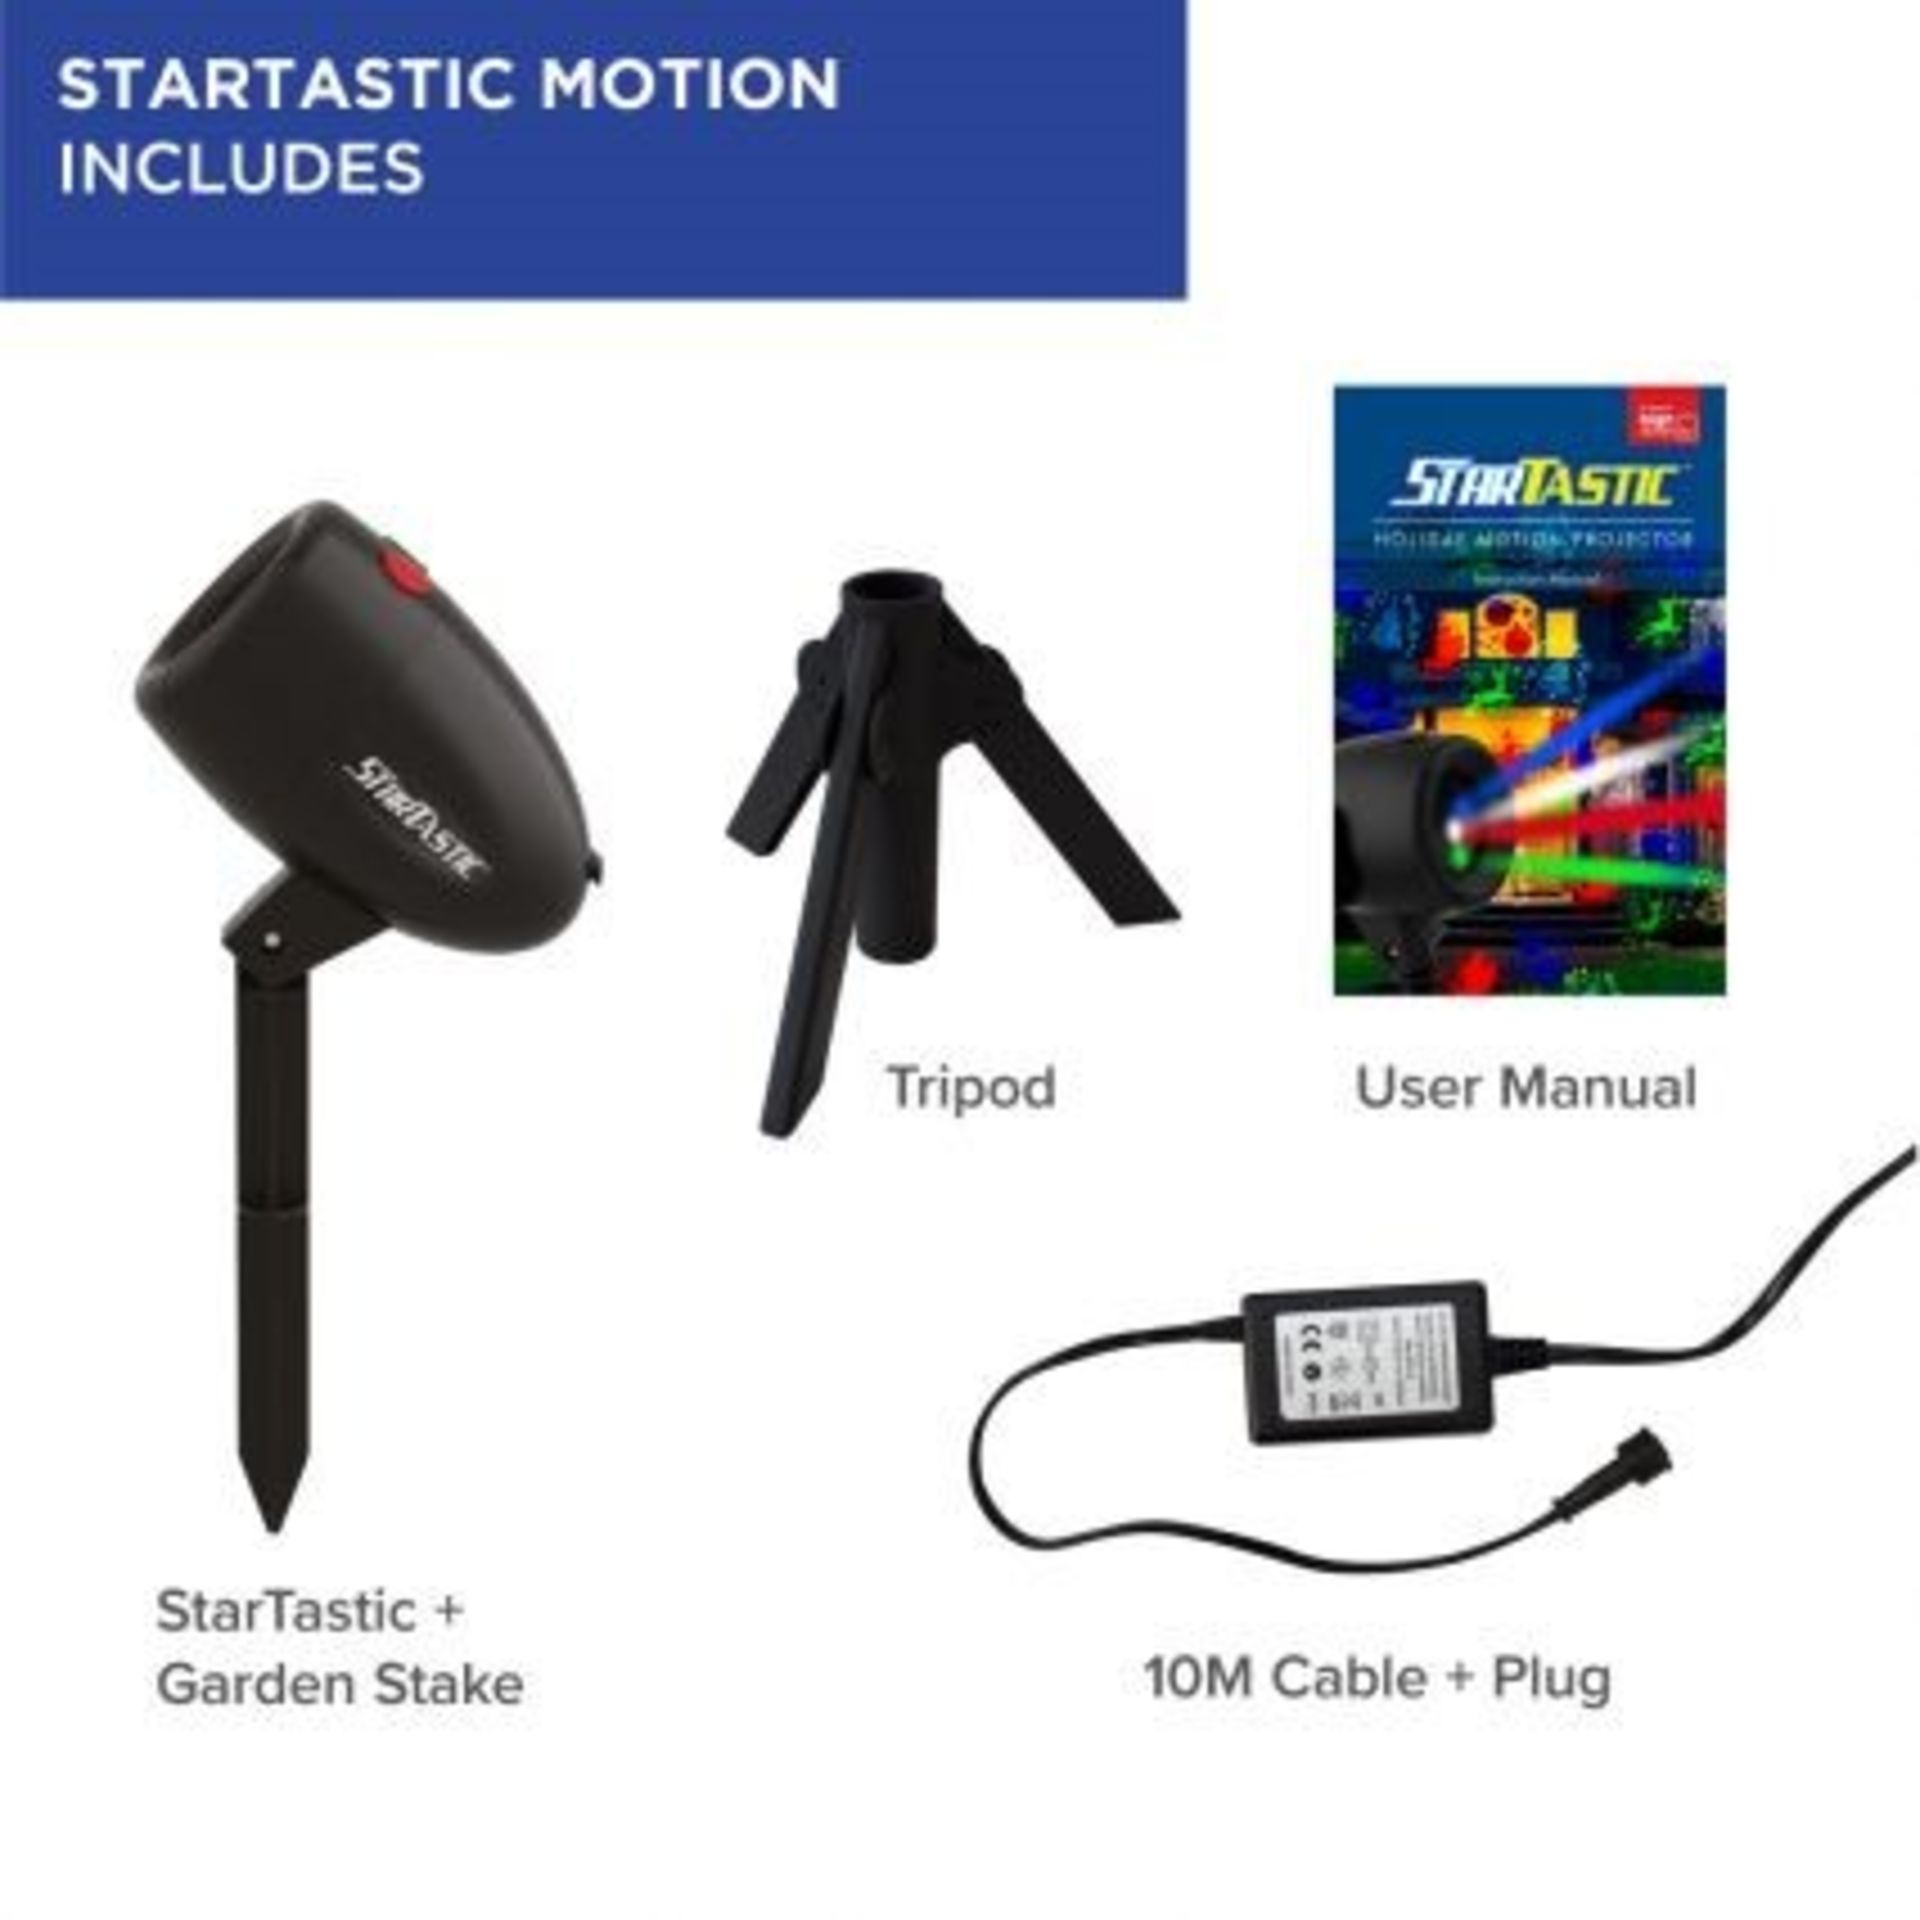 | 1X | BOX OF 6 STARTASTIC ACTION LASER PROJECTORS WITH 6 LASER MODES | NEW AND BOXED | SKU - Image 8 of 8